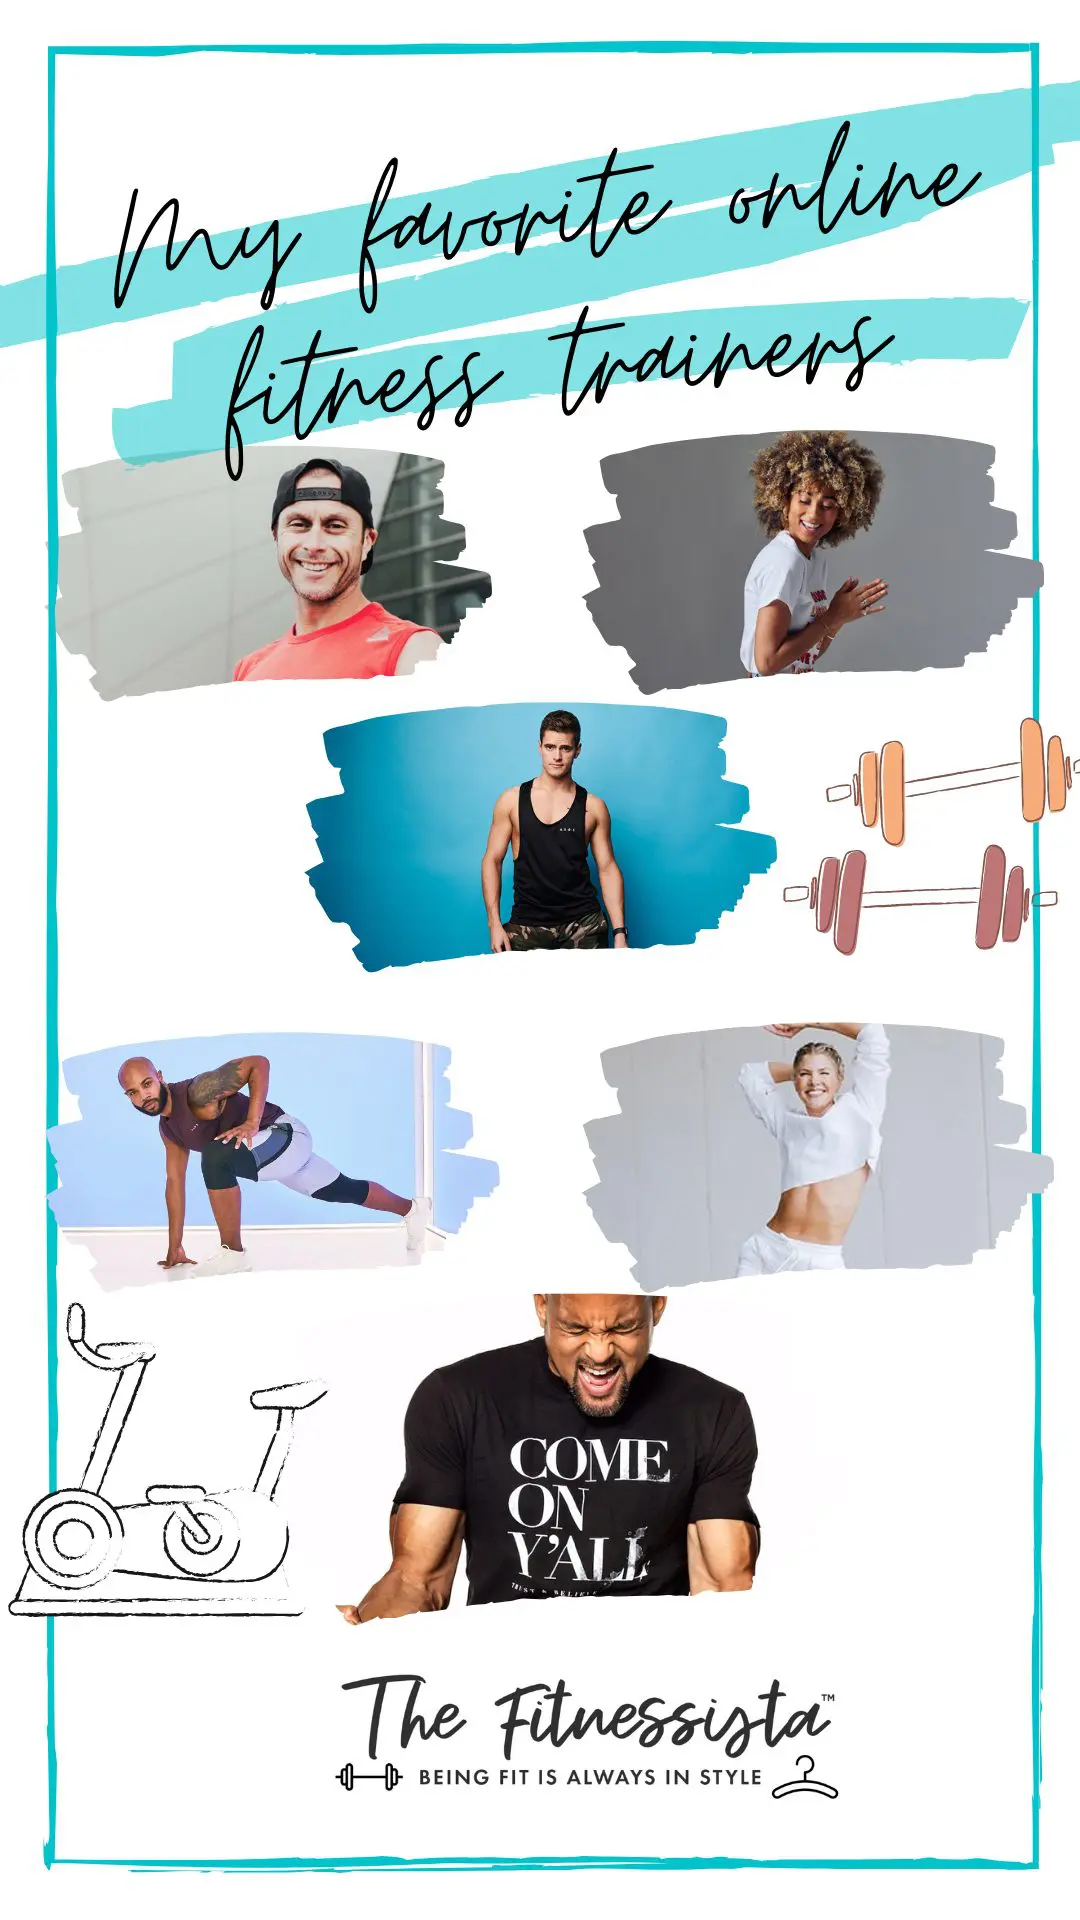 10 of my favorite online fitness trainers - The Fitnessista